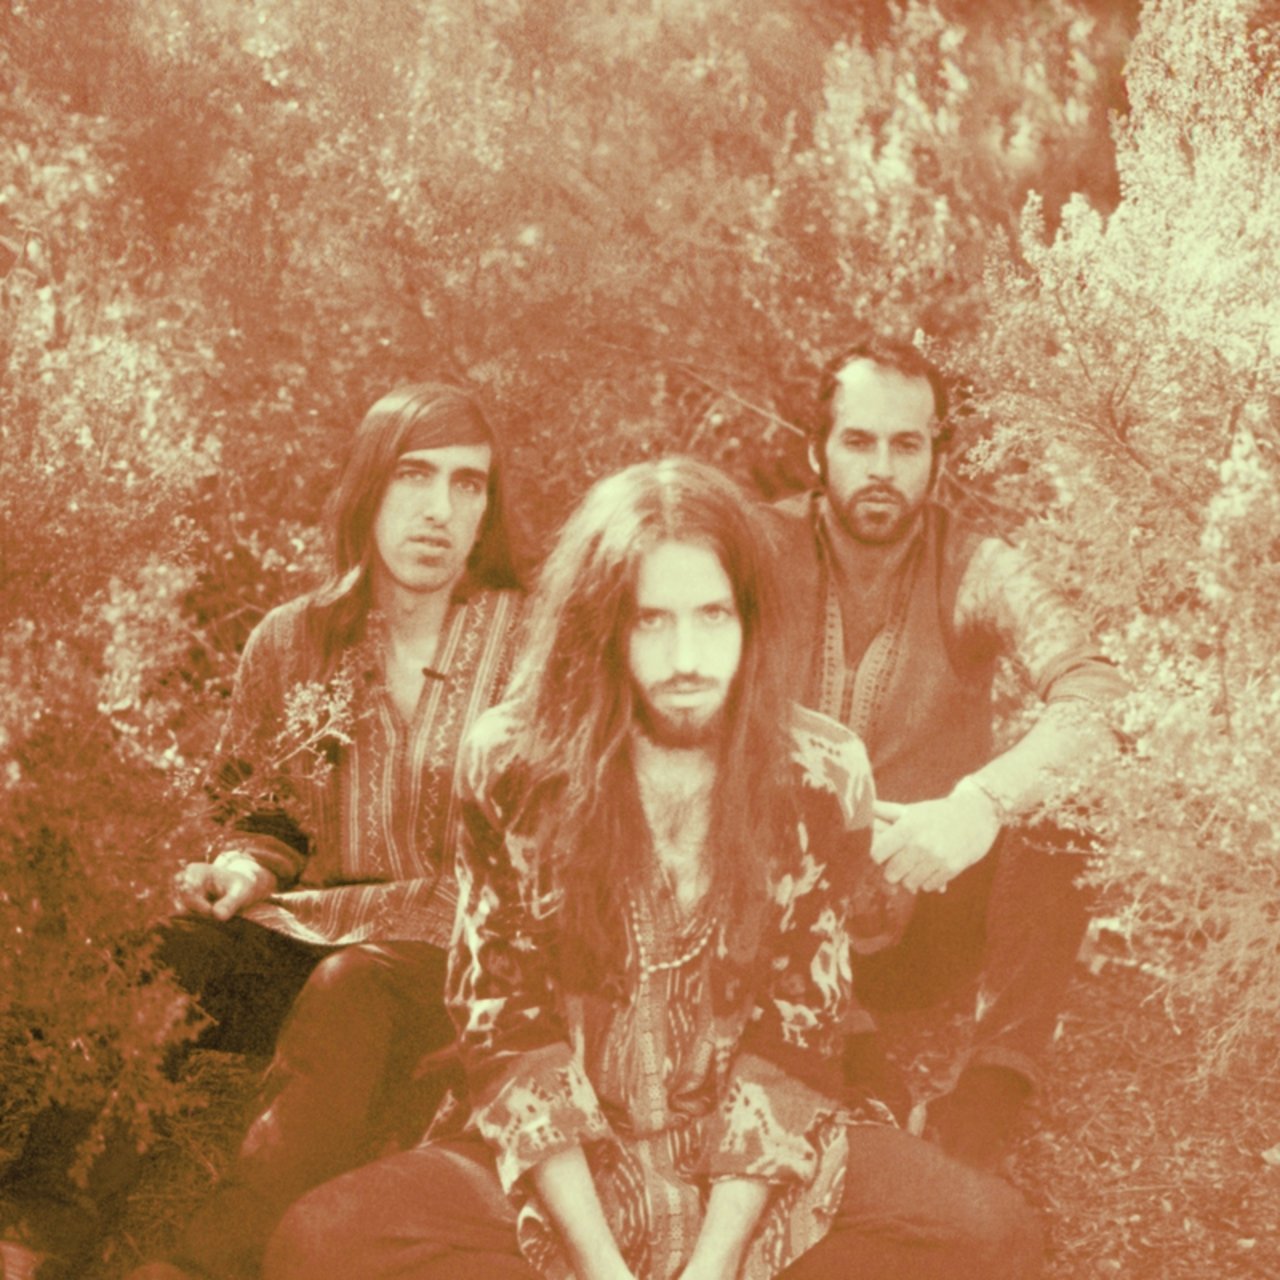 Crystal Fighters — Love Natural cover artwork